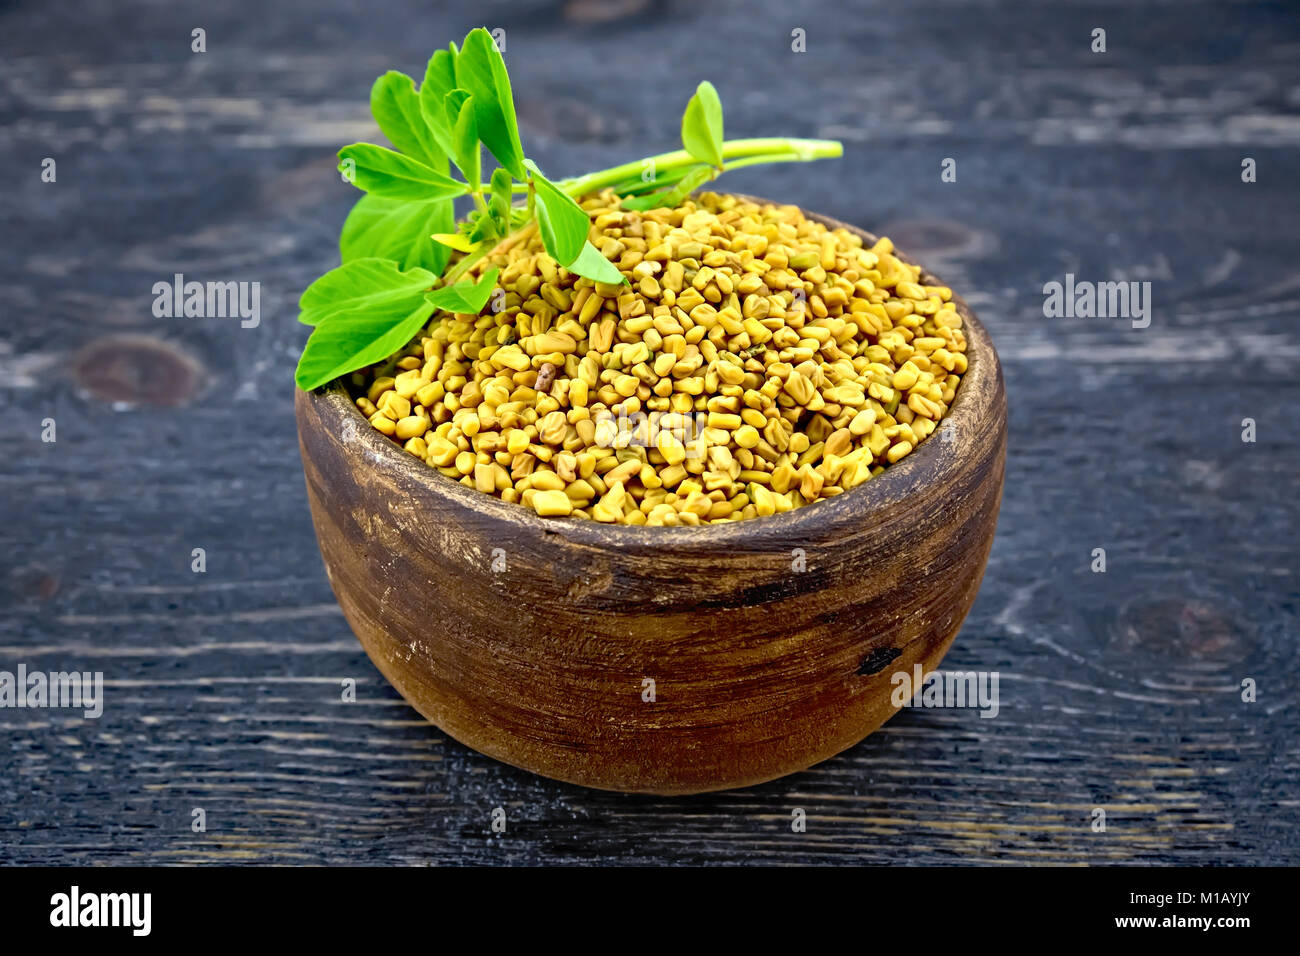 Fenugreek in a clay bowl with green leaves on a wooden plank background Stock Photo